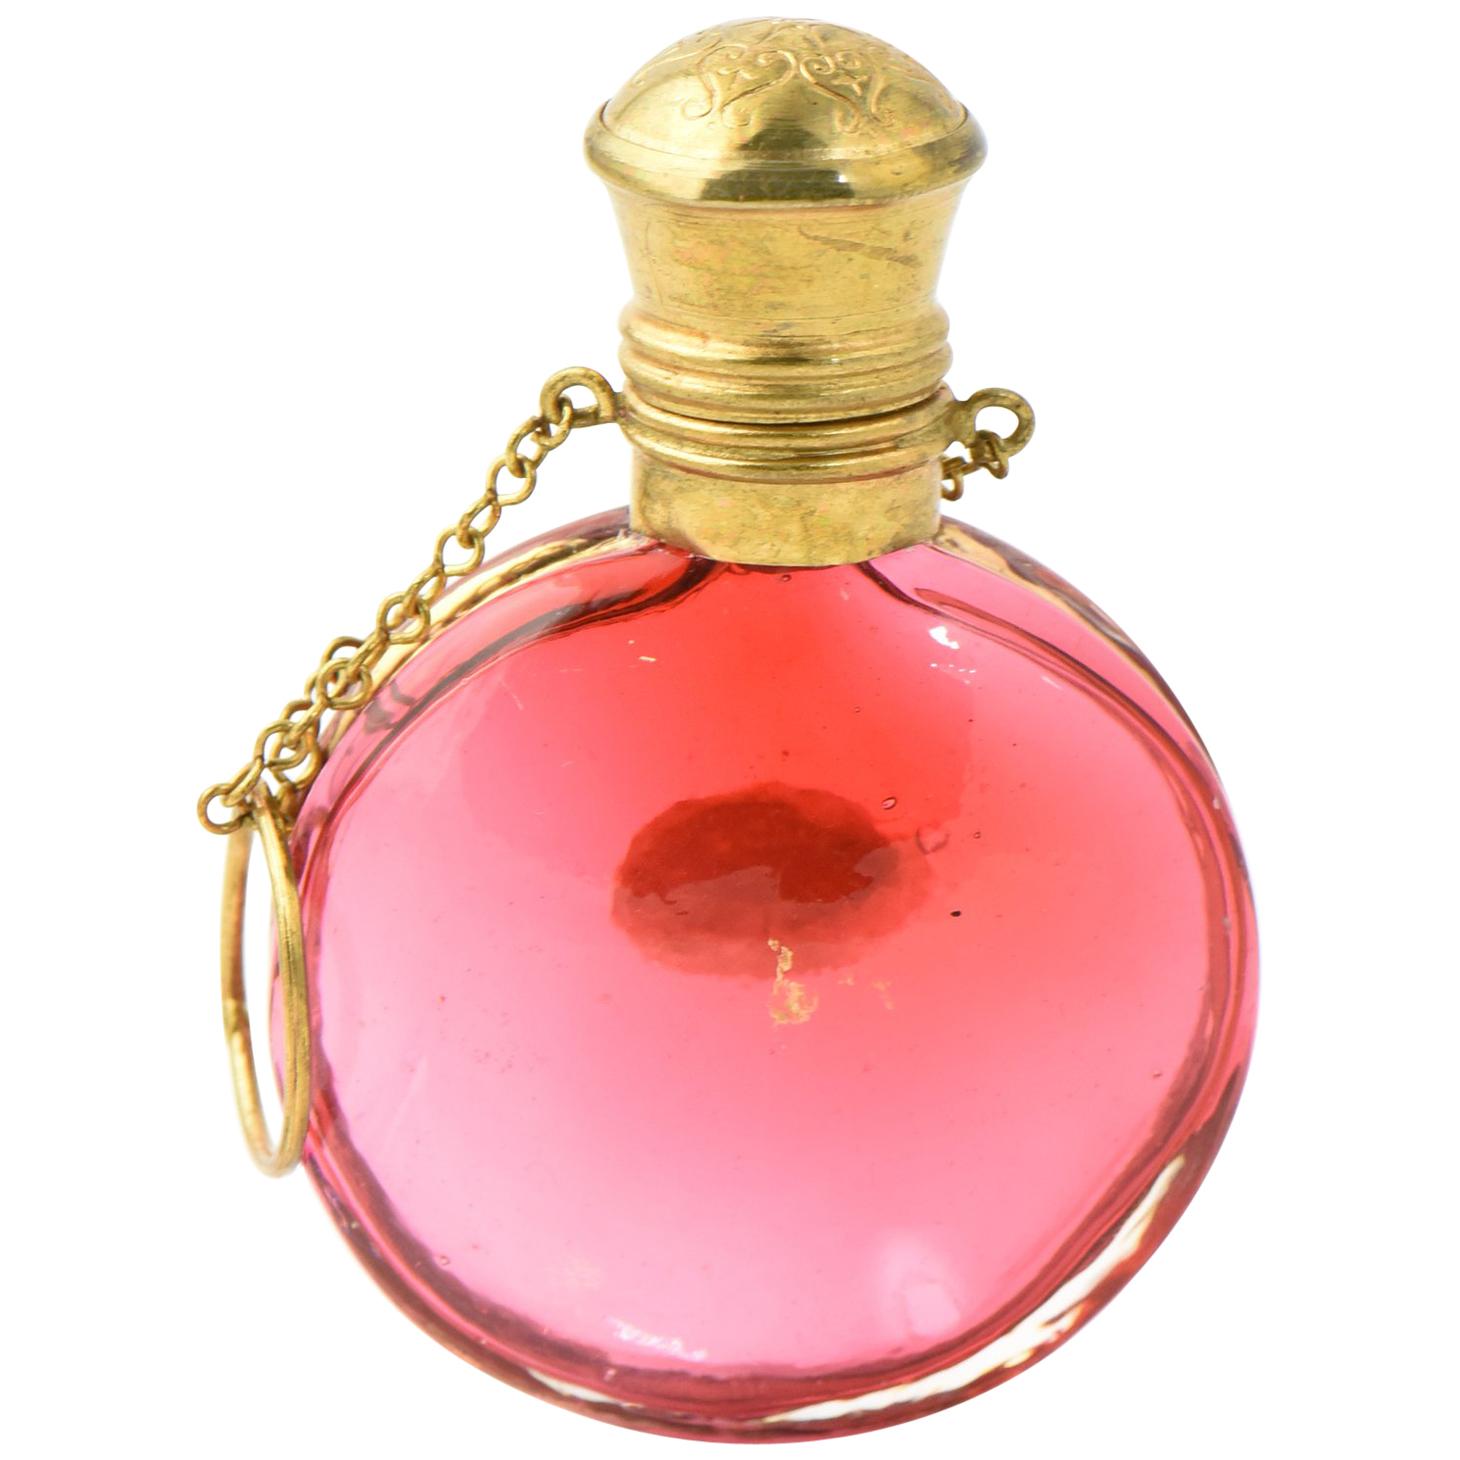 Antique Bohemian Cranberry Gilt Perfume Bottle with Chatelaine Finger Chain